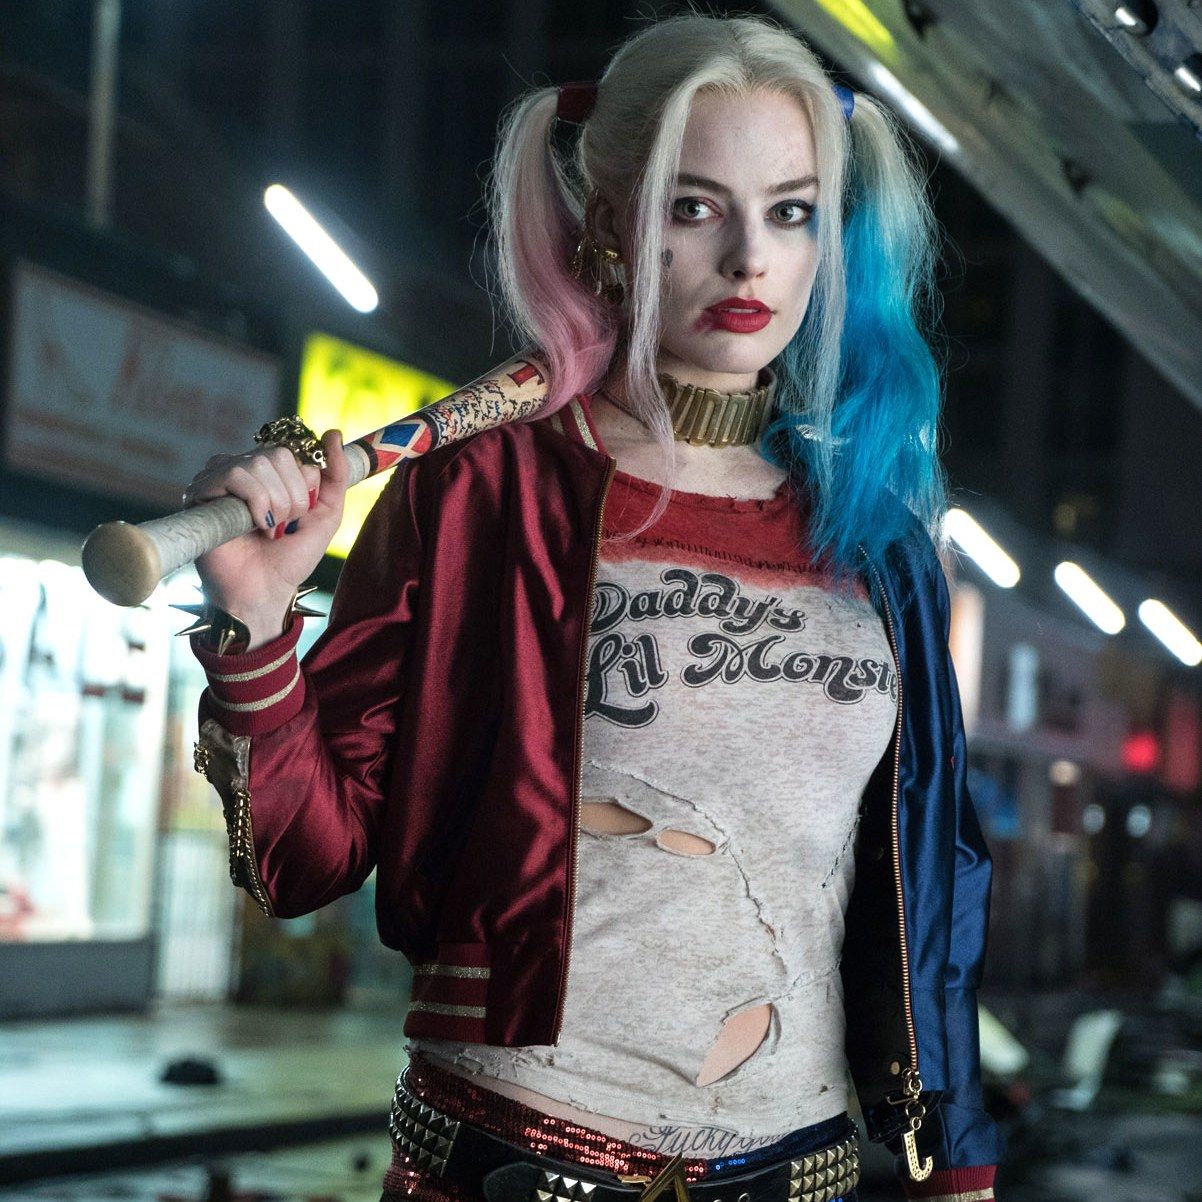 See the Star-Studded Cast of Suicide Squad!